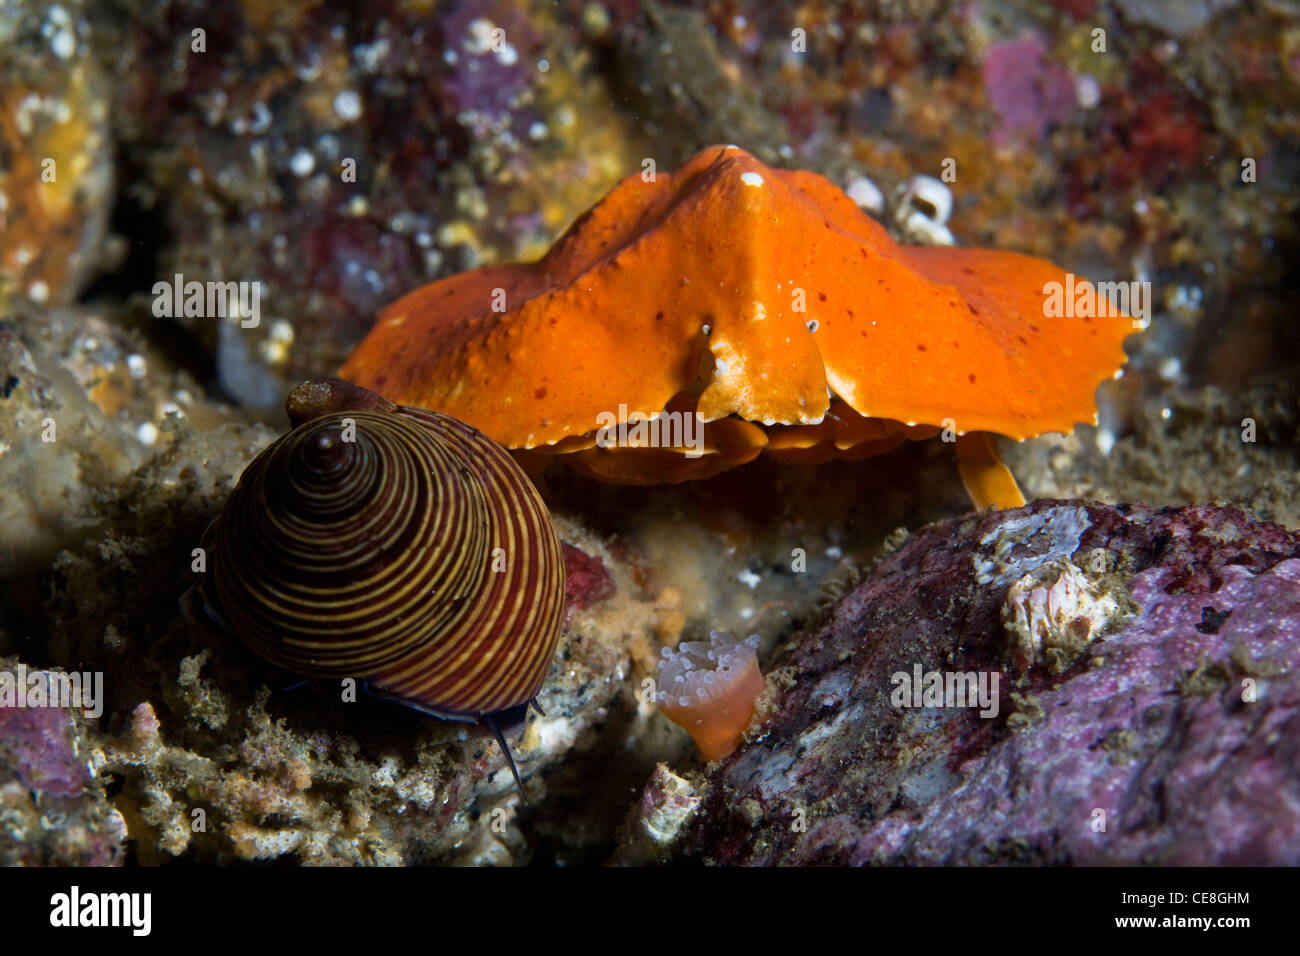 A small, orange Helmet crab, Cryptolithodes sitchensis, crawls along the rocky bottom of a kelp forest near a Blue top snail. Stock Photo